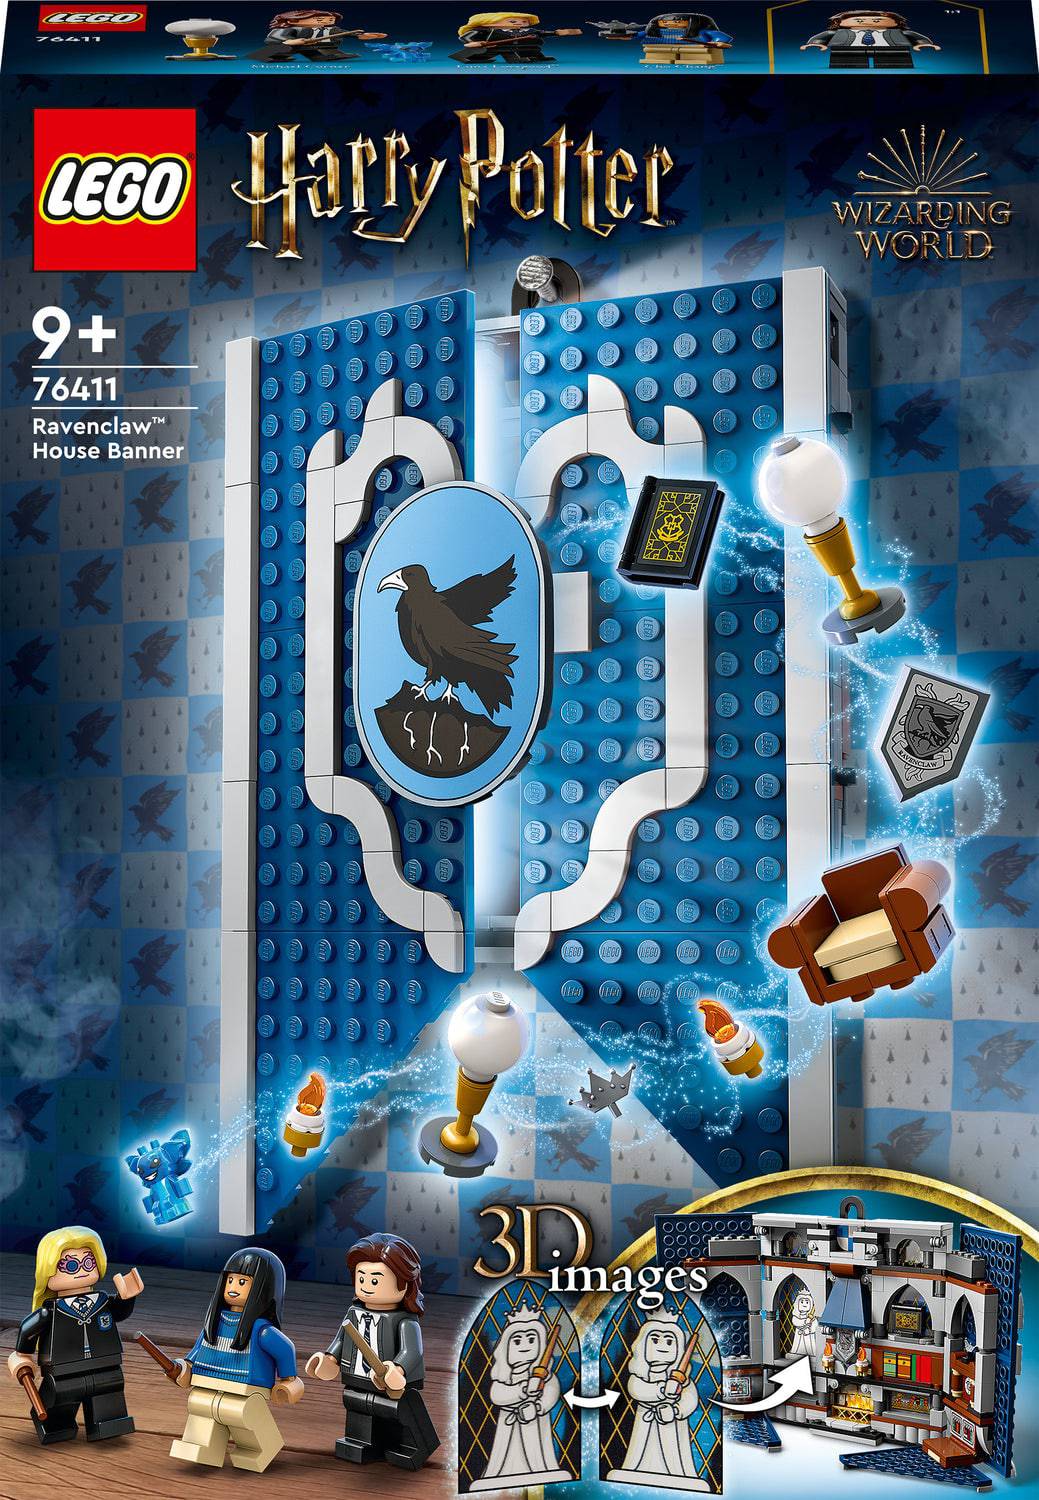 76411 Ravenclaw House Banner - A Child's Delight